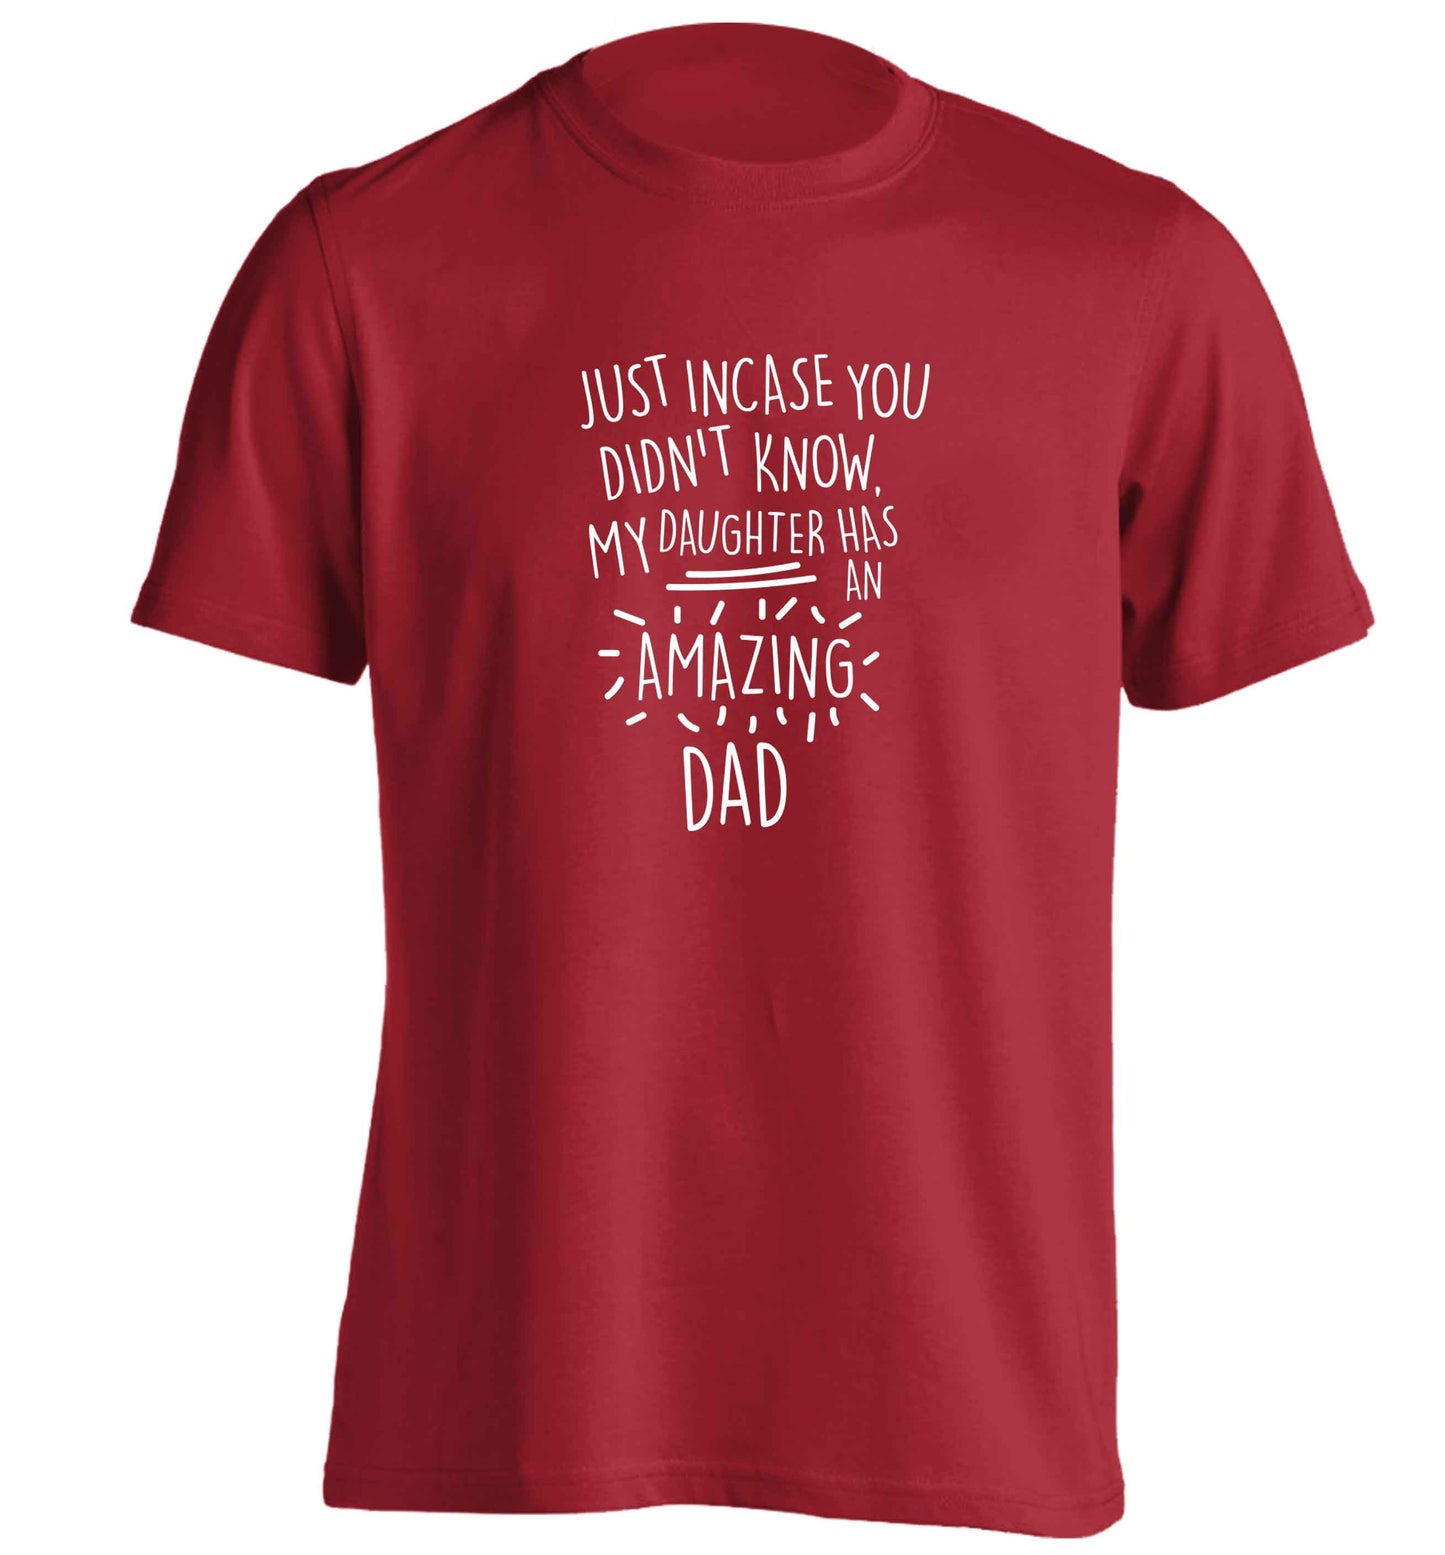 Just incase you didn't know my daughter has an amazing dad adults unisex red Tshirt 2XL